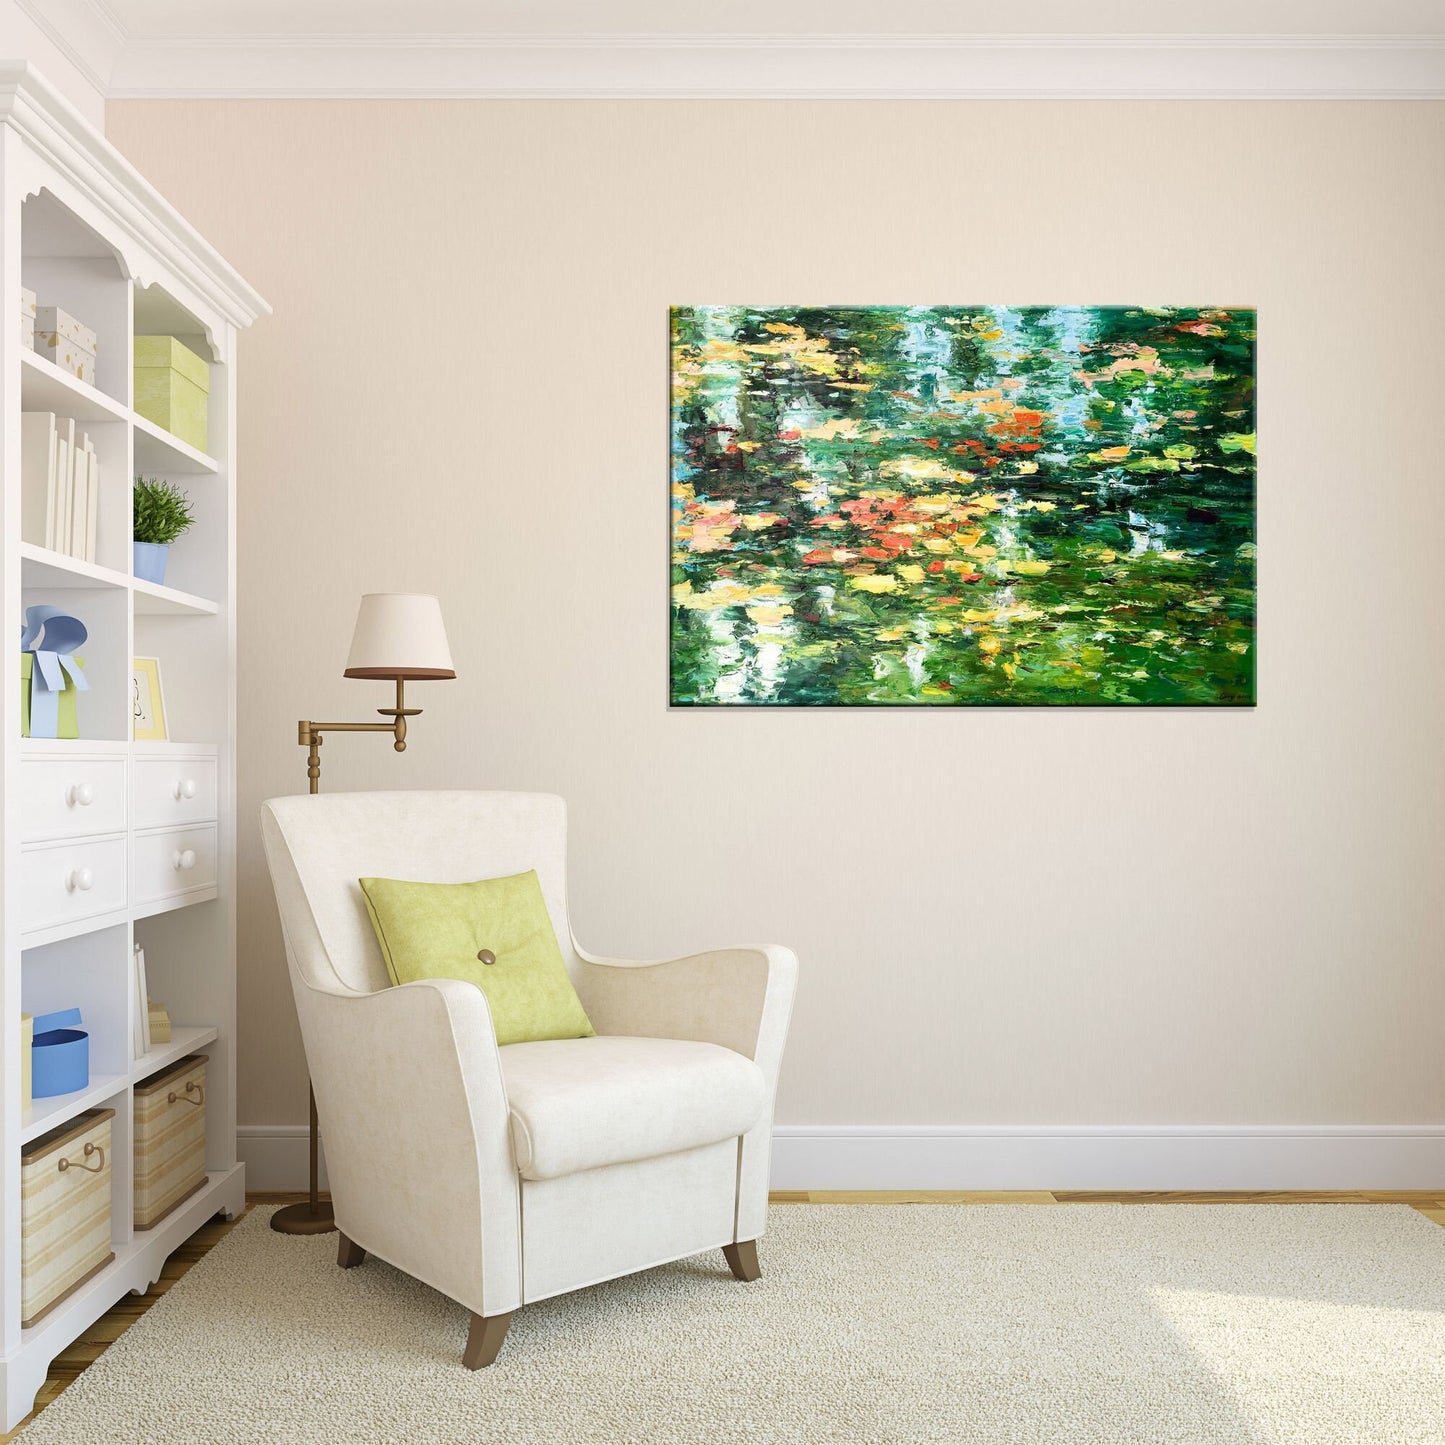 Contemporary Painting Waterlily Pond, Canvas Wall Art, Canvas Painting, Oil Painting Original, Oil Painting Landscape, Abstract Oil Painting